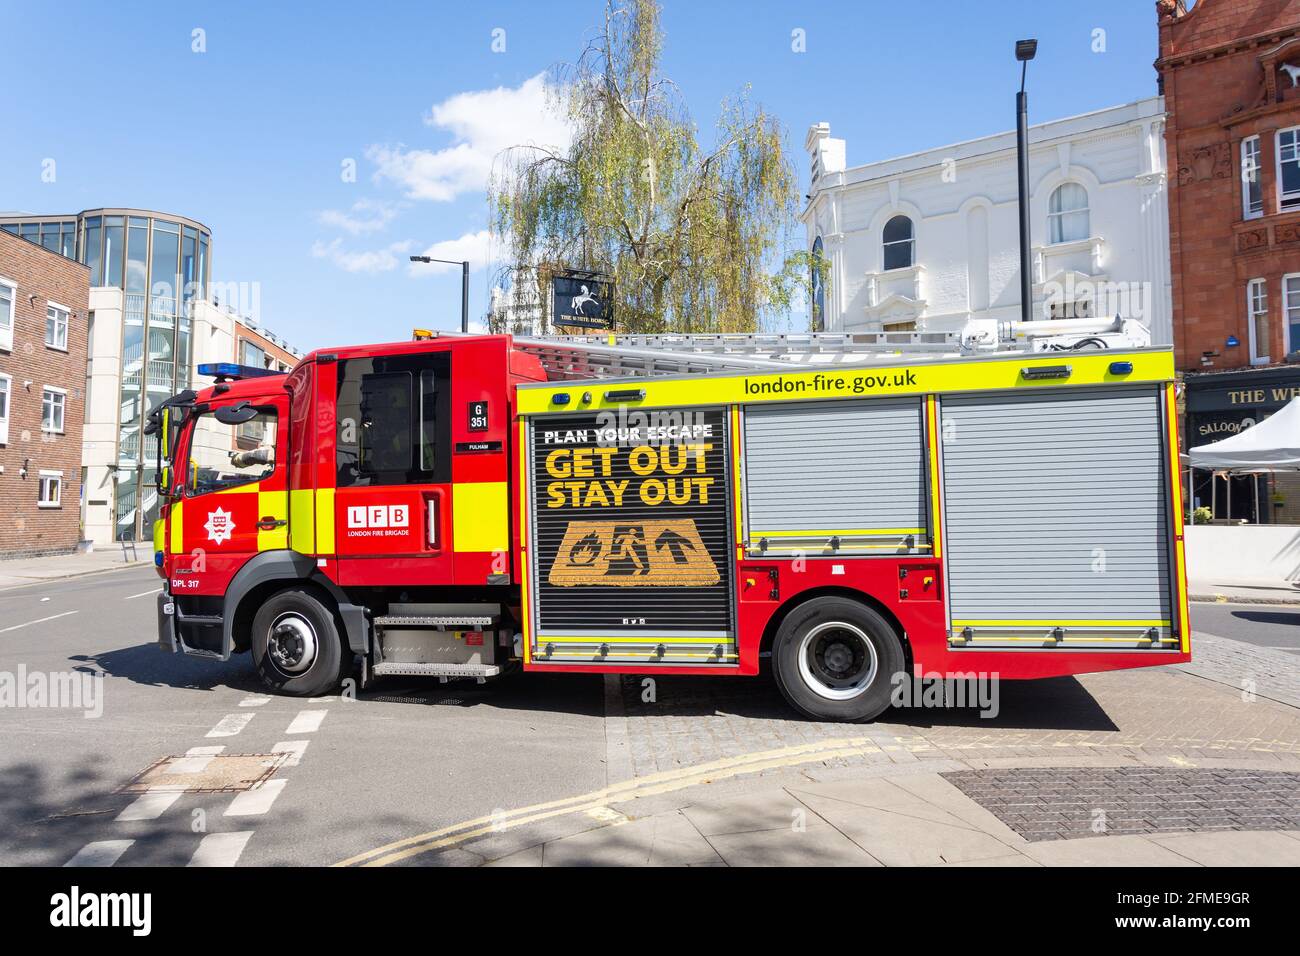 London Fire Brigade Engine on Call, Parsons Green, London Borough of Hammersmith and Fulham, Greater London, England, United Kingdom Foto Stock